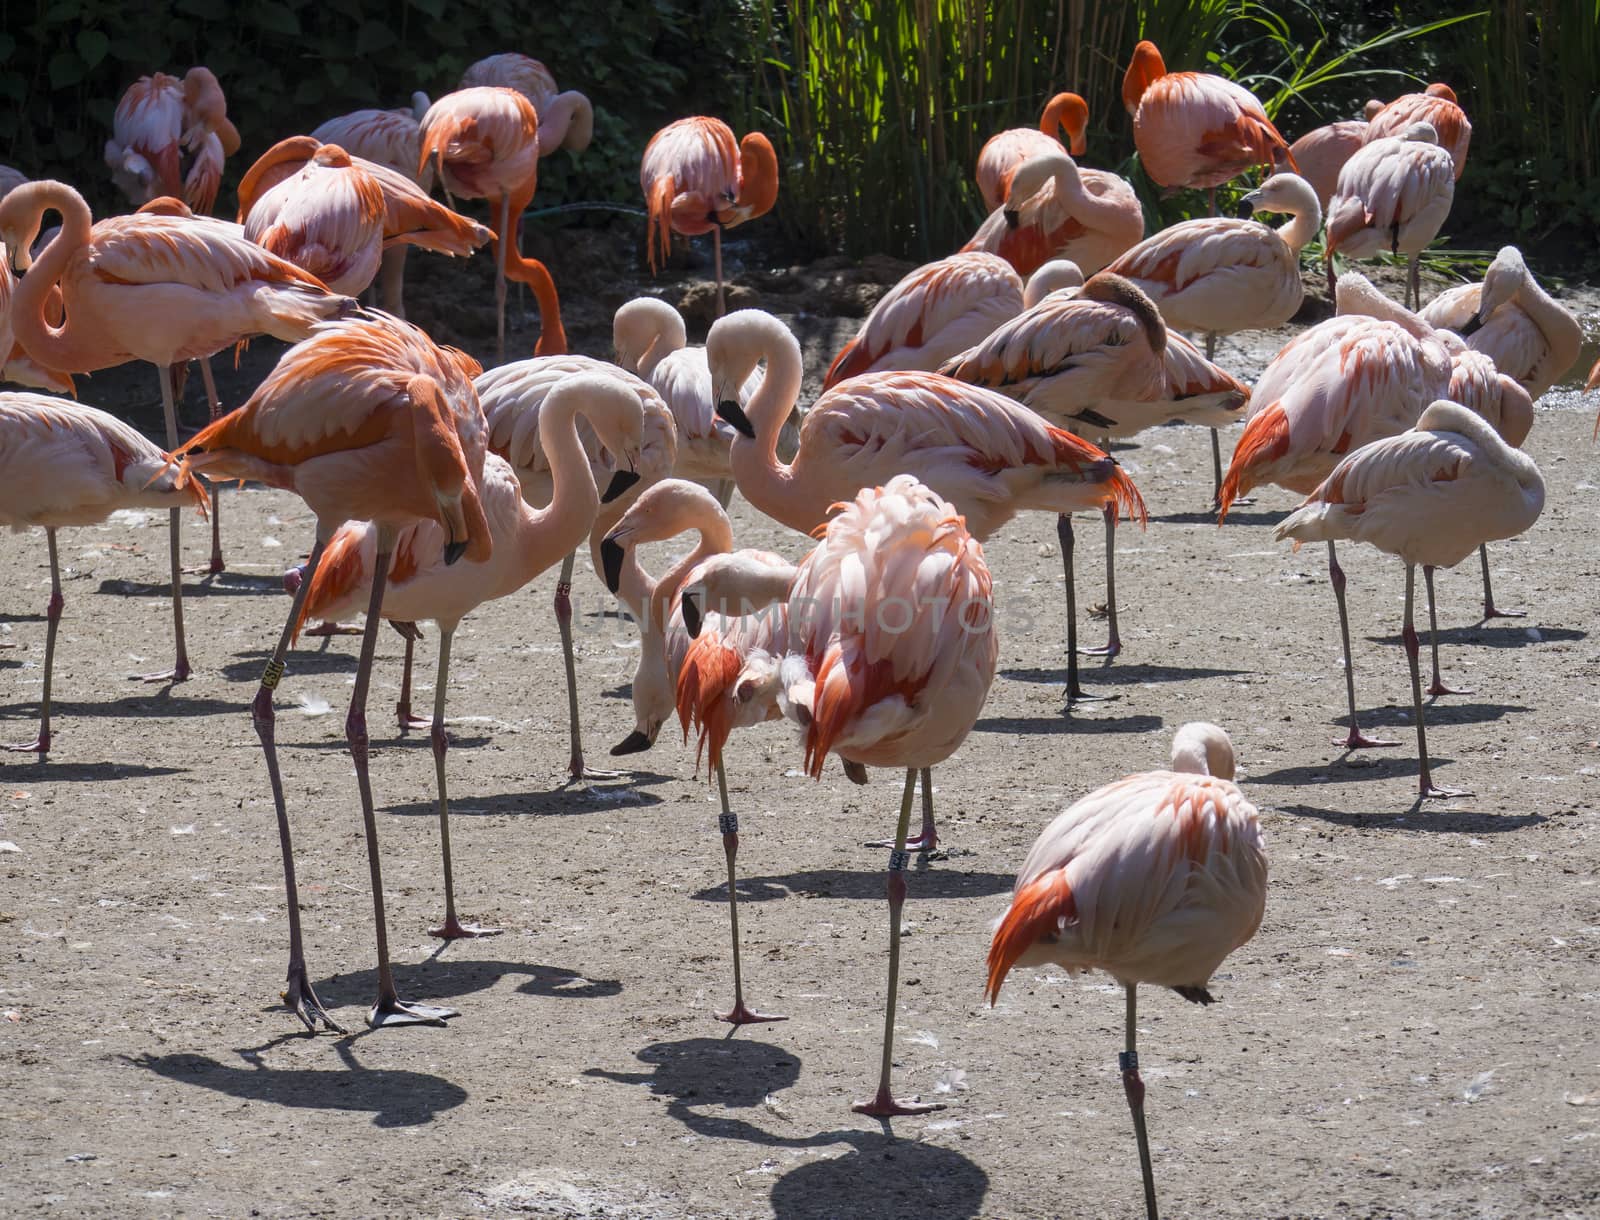 Group of red and pink flamingos standing on dirt. Chilean flamingo Phoenicopterus chilensis and The American flamingo Phoenicopterus ruber